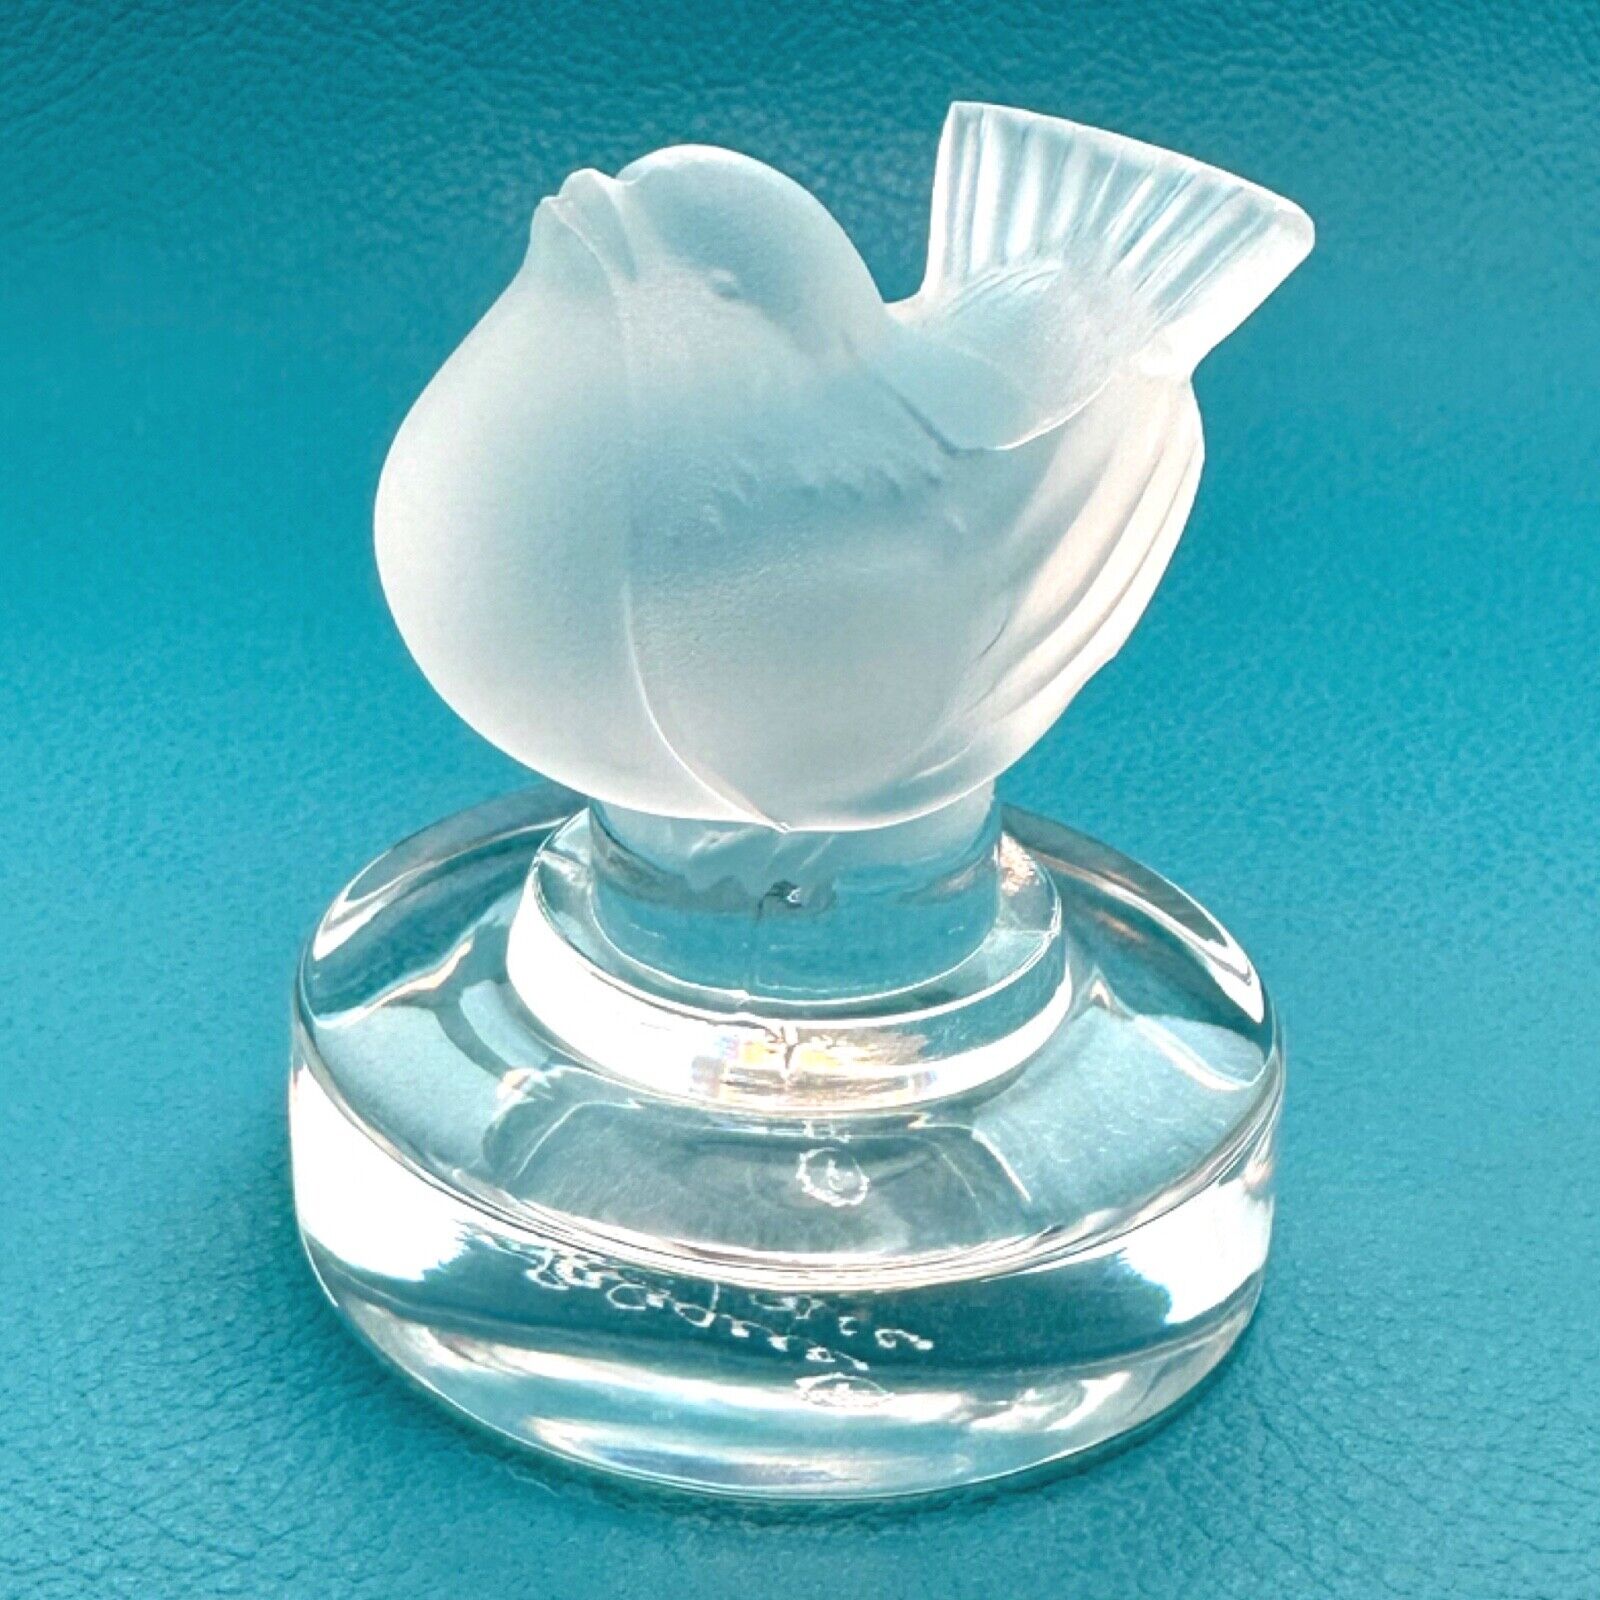 LALIQUE France Crystal Bird Figurine Signed Vintage Collectable